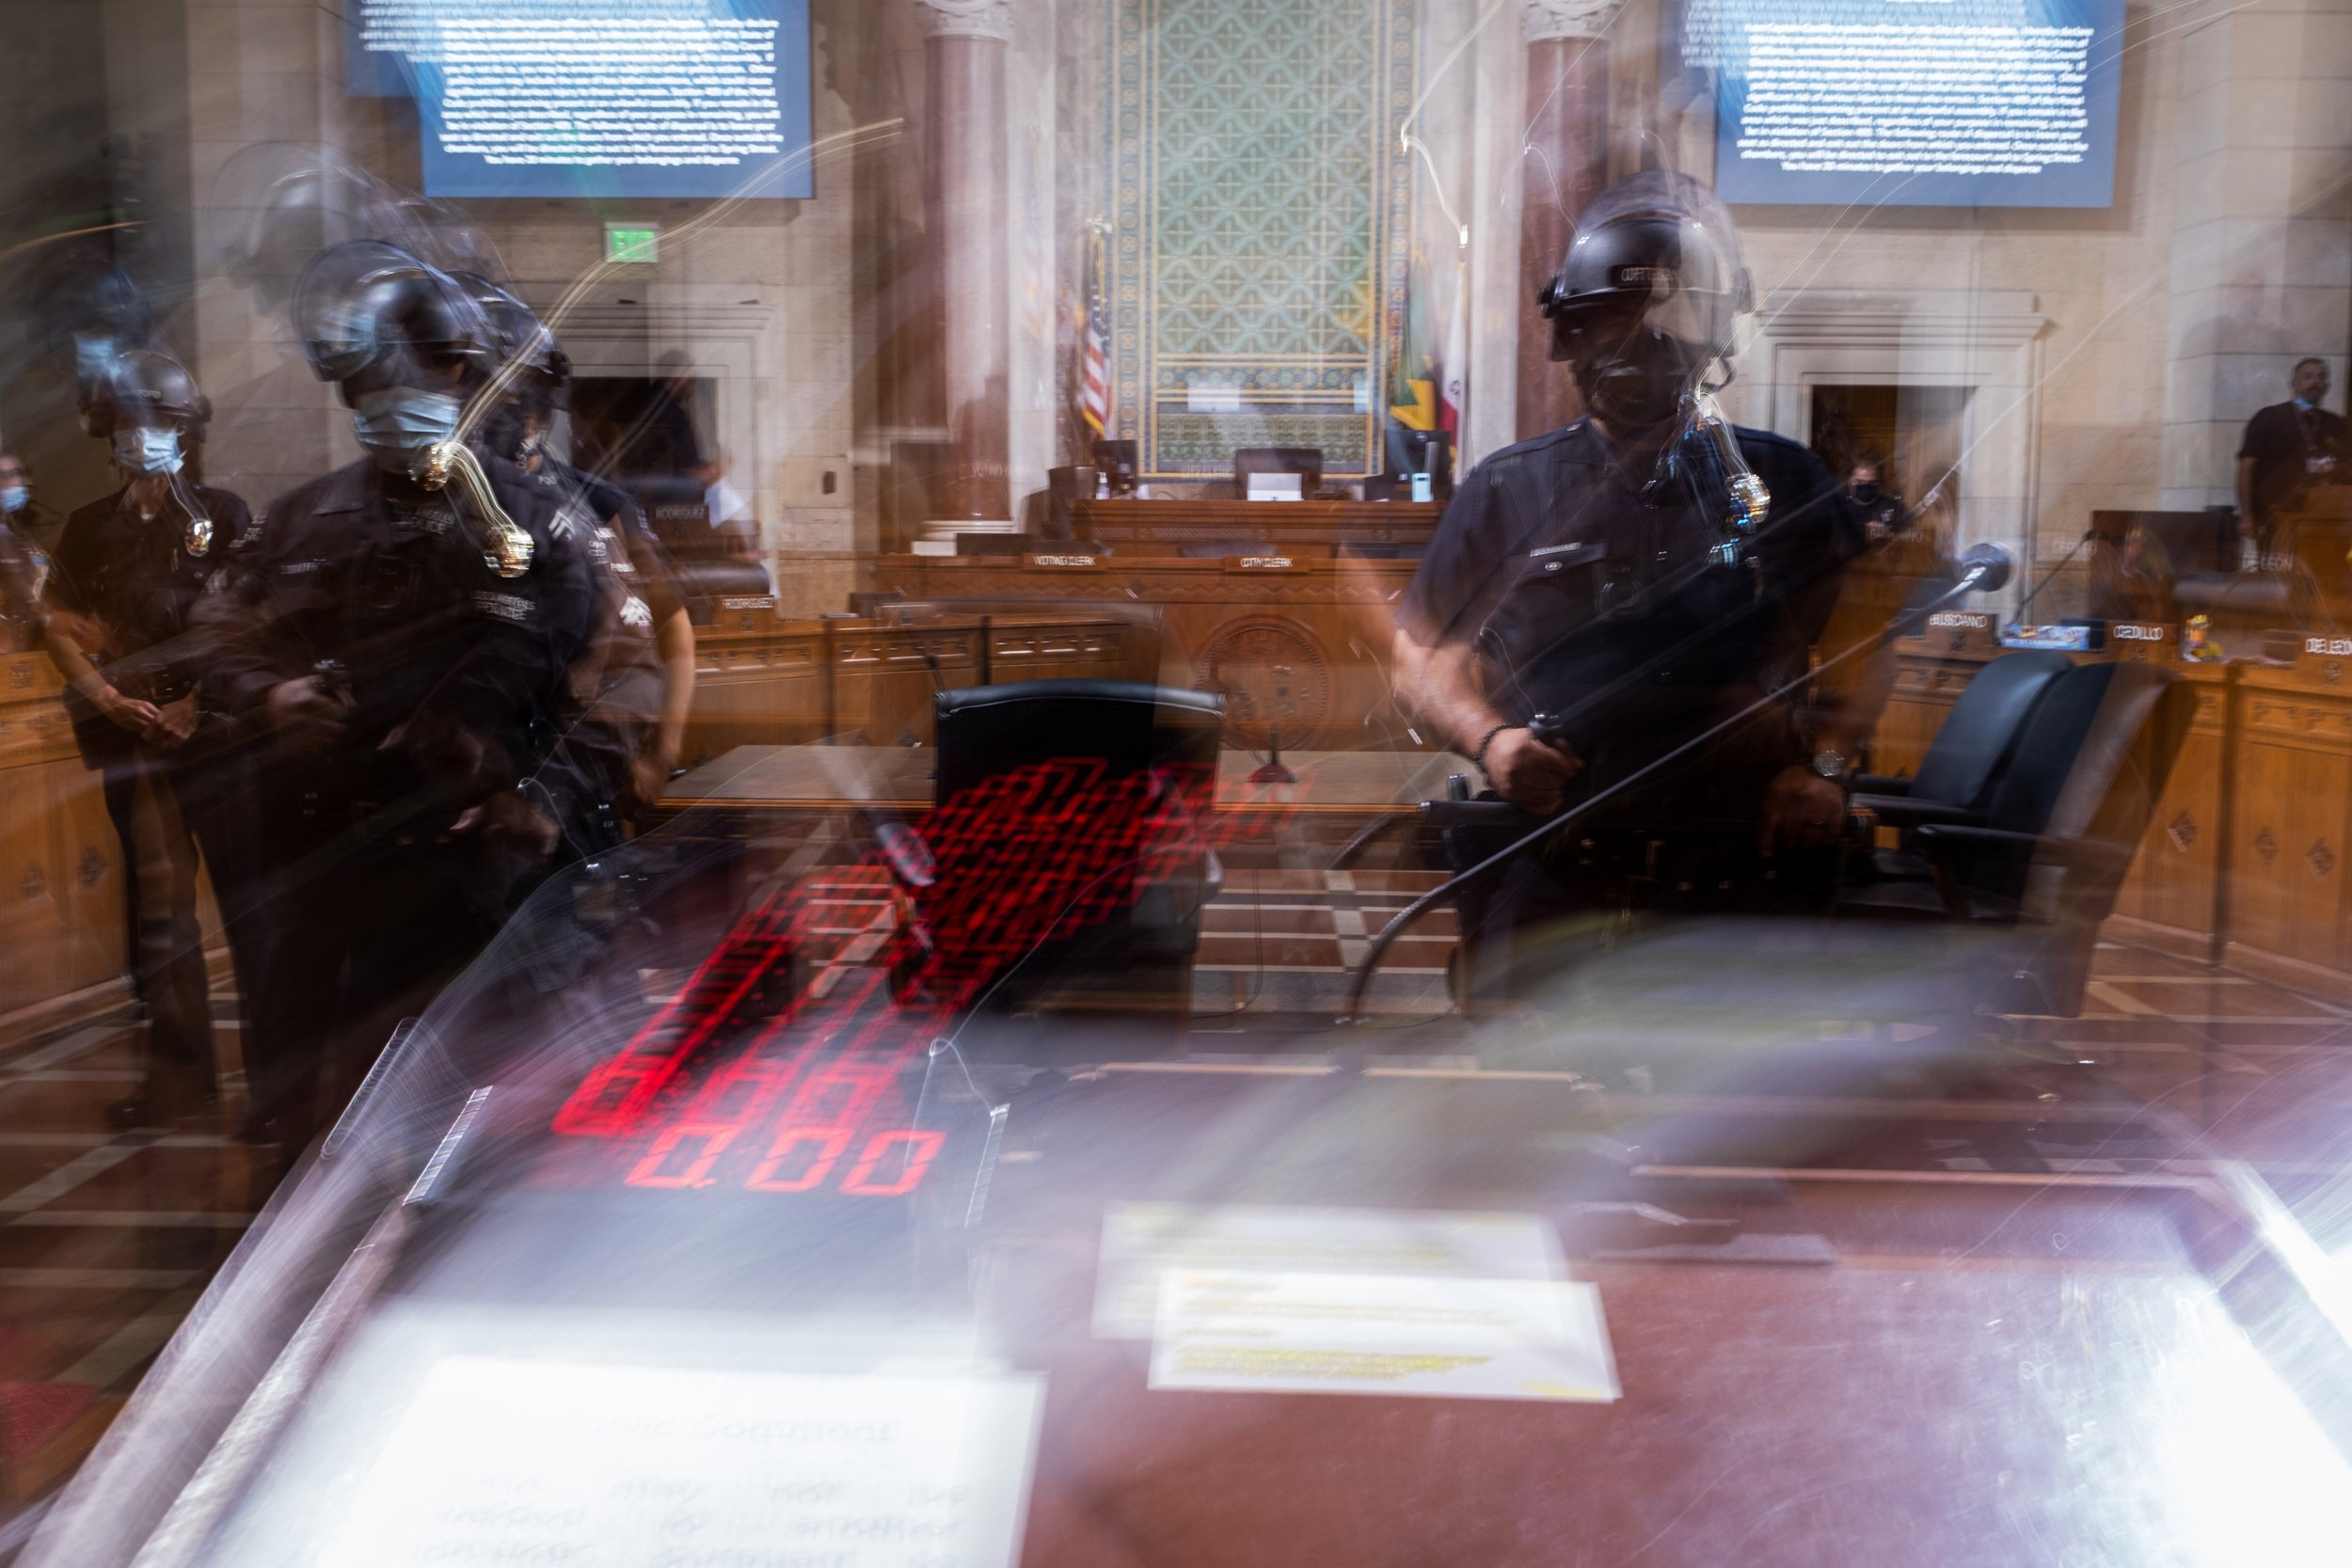  Police officers stand by after two attendees at the public hearing were detained. The crowd was ordered to disperse, and the public hearing was ended. Los Angeles City Hall on August 9, 2022. (Anna Sophia Moltke | The Corsair) 